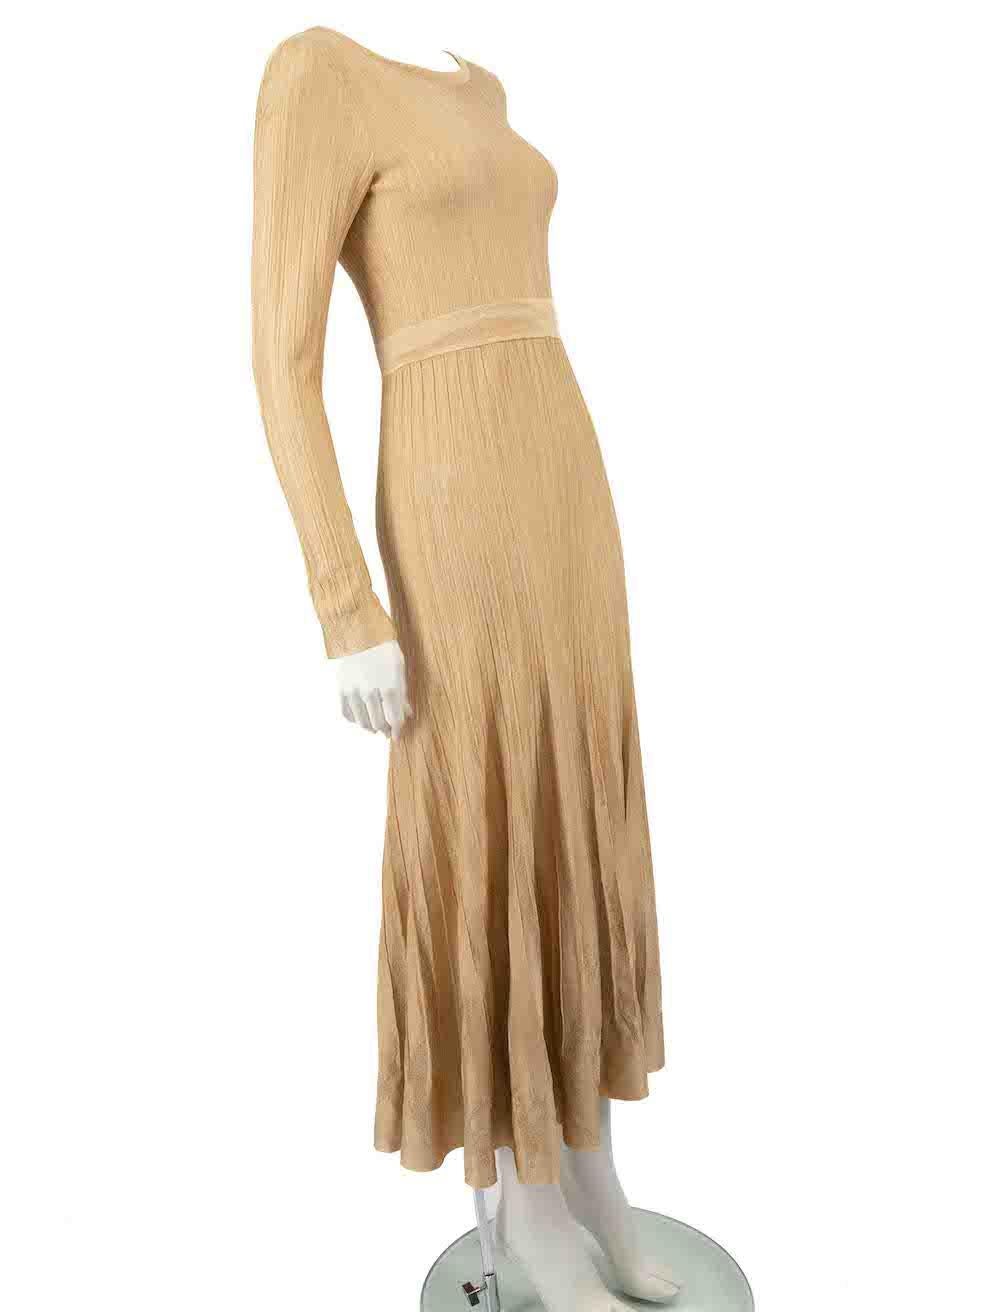 CONDITION is Very good. Hardly any visible wear to dress is evident on this used Chanel designer resale item.
 
 
 
 Details
 
 
 2016
 
 Paris-Rome Metiers d'Art model
 
 Beige
 
 Viscose
 
 Maxi dress
 
 Knitted and stretchy
 
 Glitter accent
 
